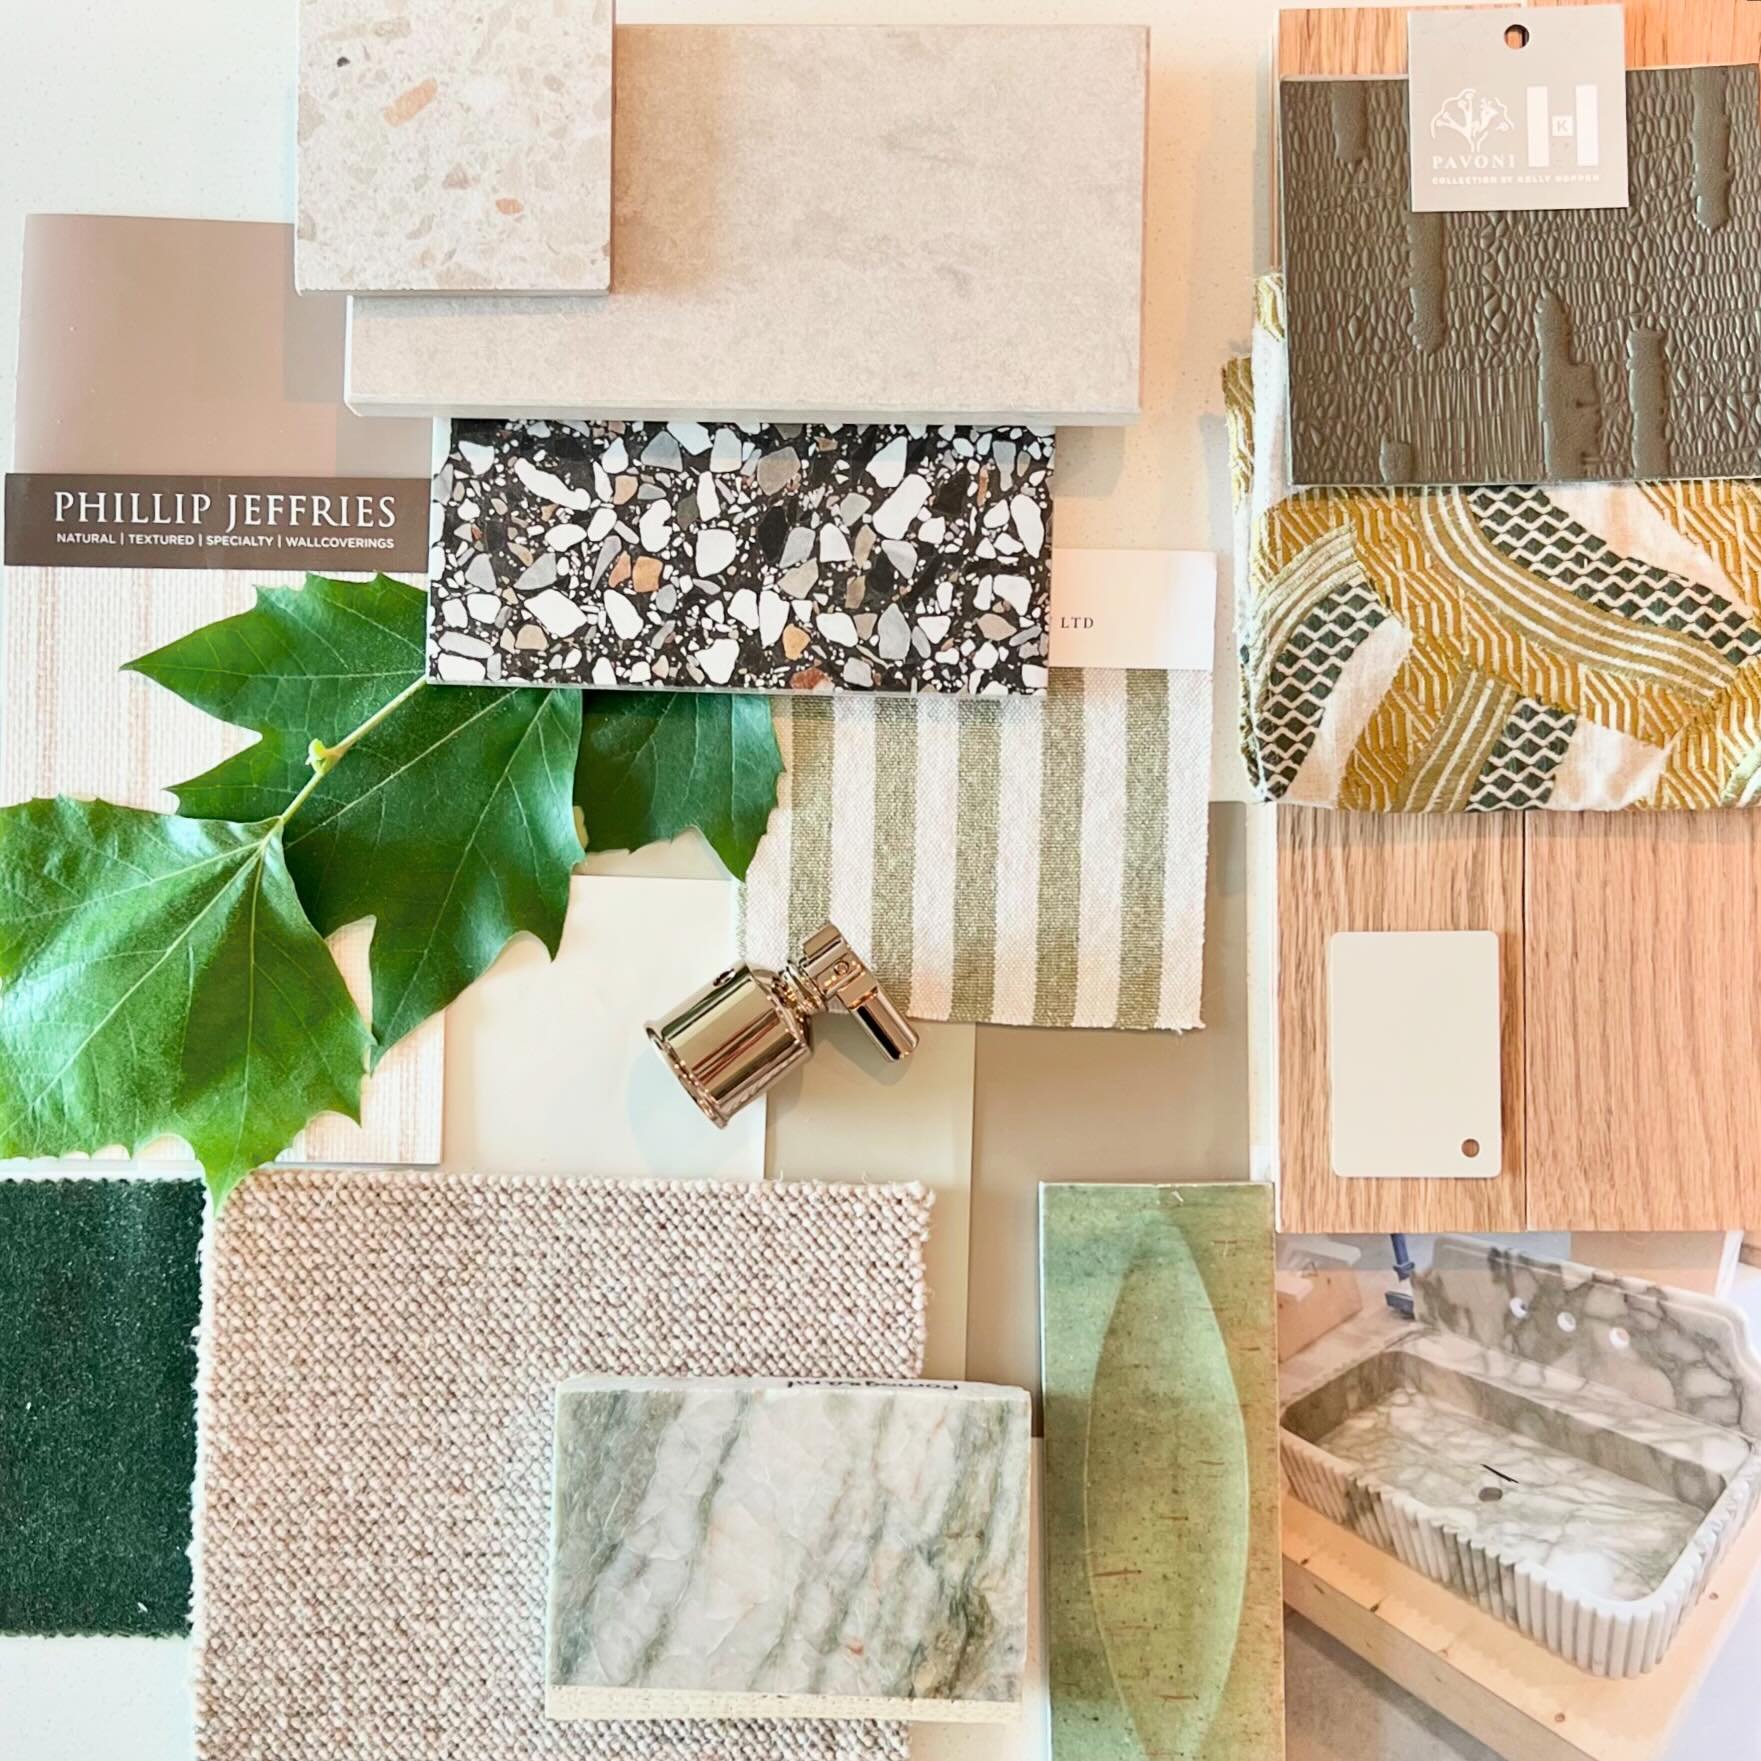 ✨Bird&rsquo;s eye view of materials for our Overbrook project ✨Relaxed CA Coastal with natural finishes, organic materials and tranquil warm tones. Counting down the days to completion with 1 month down and only 3 to go! 

#intetior #moodboards #hous